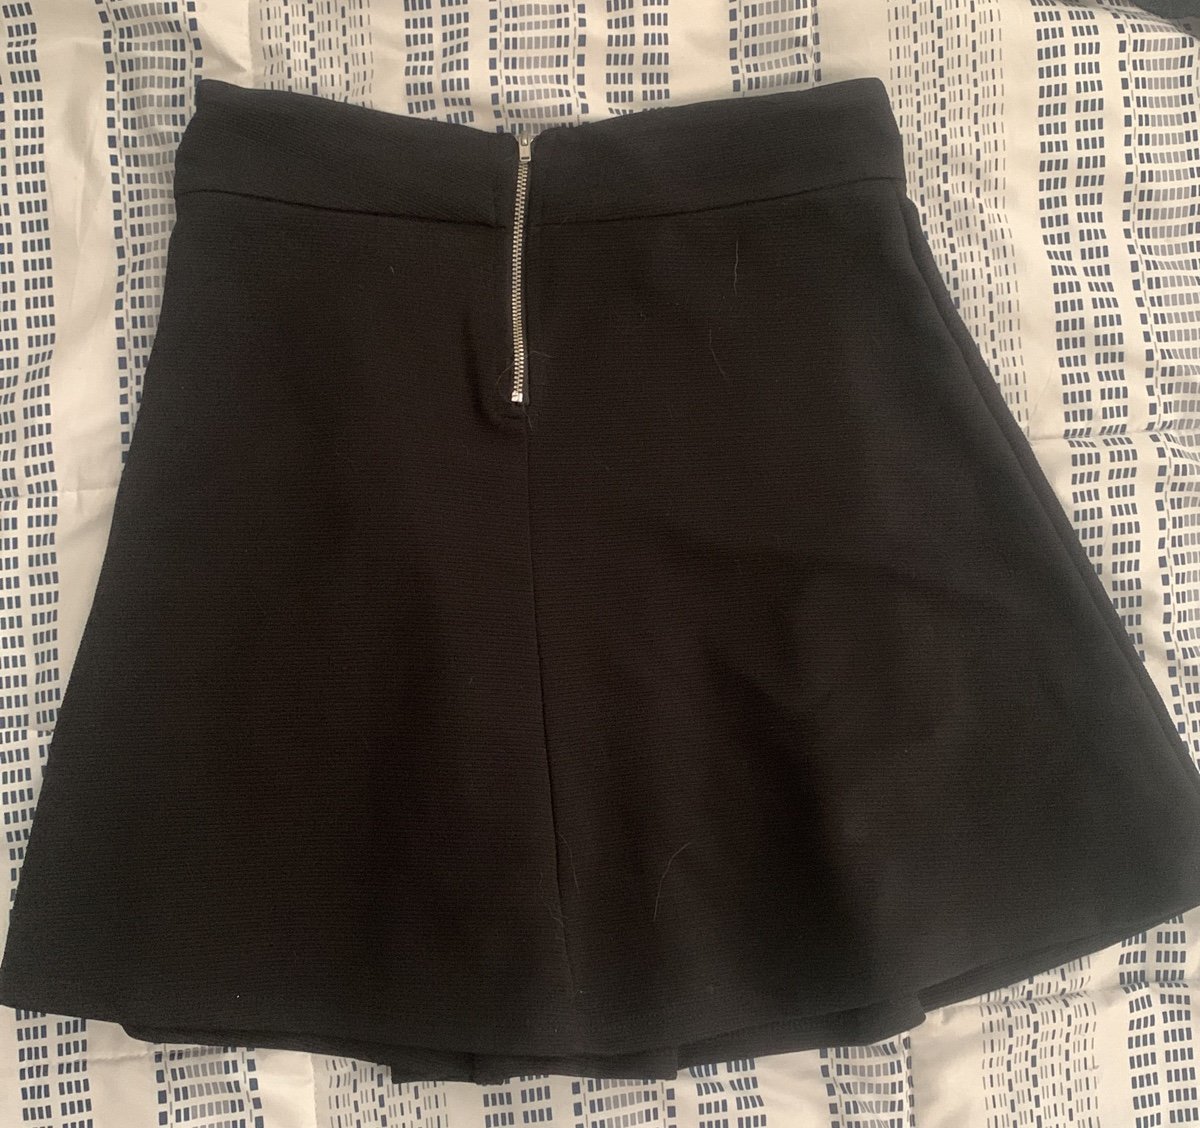 high discount Skirt KHne102y6 Buying Cheap